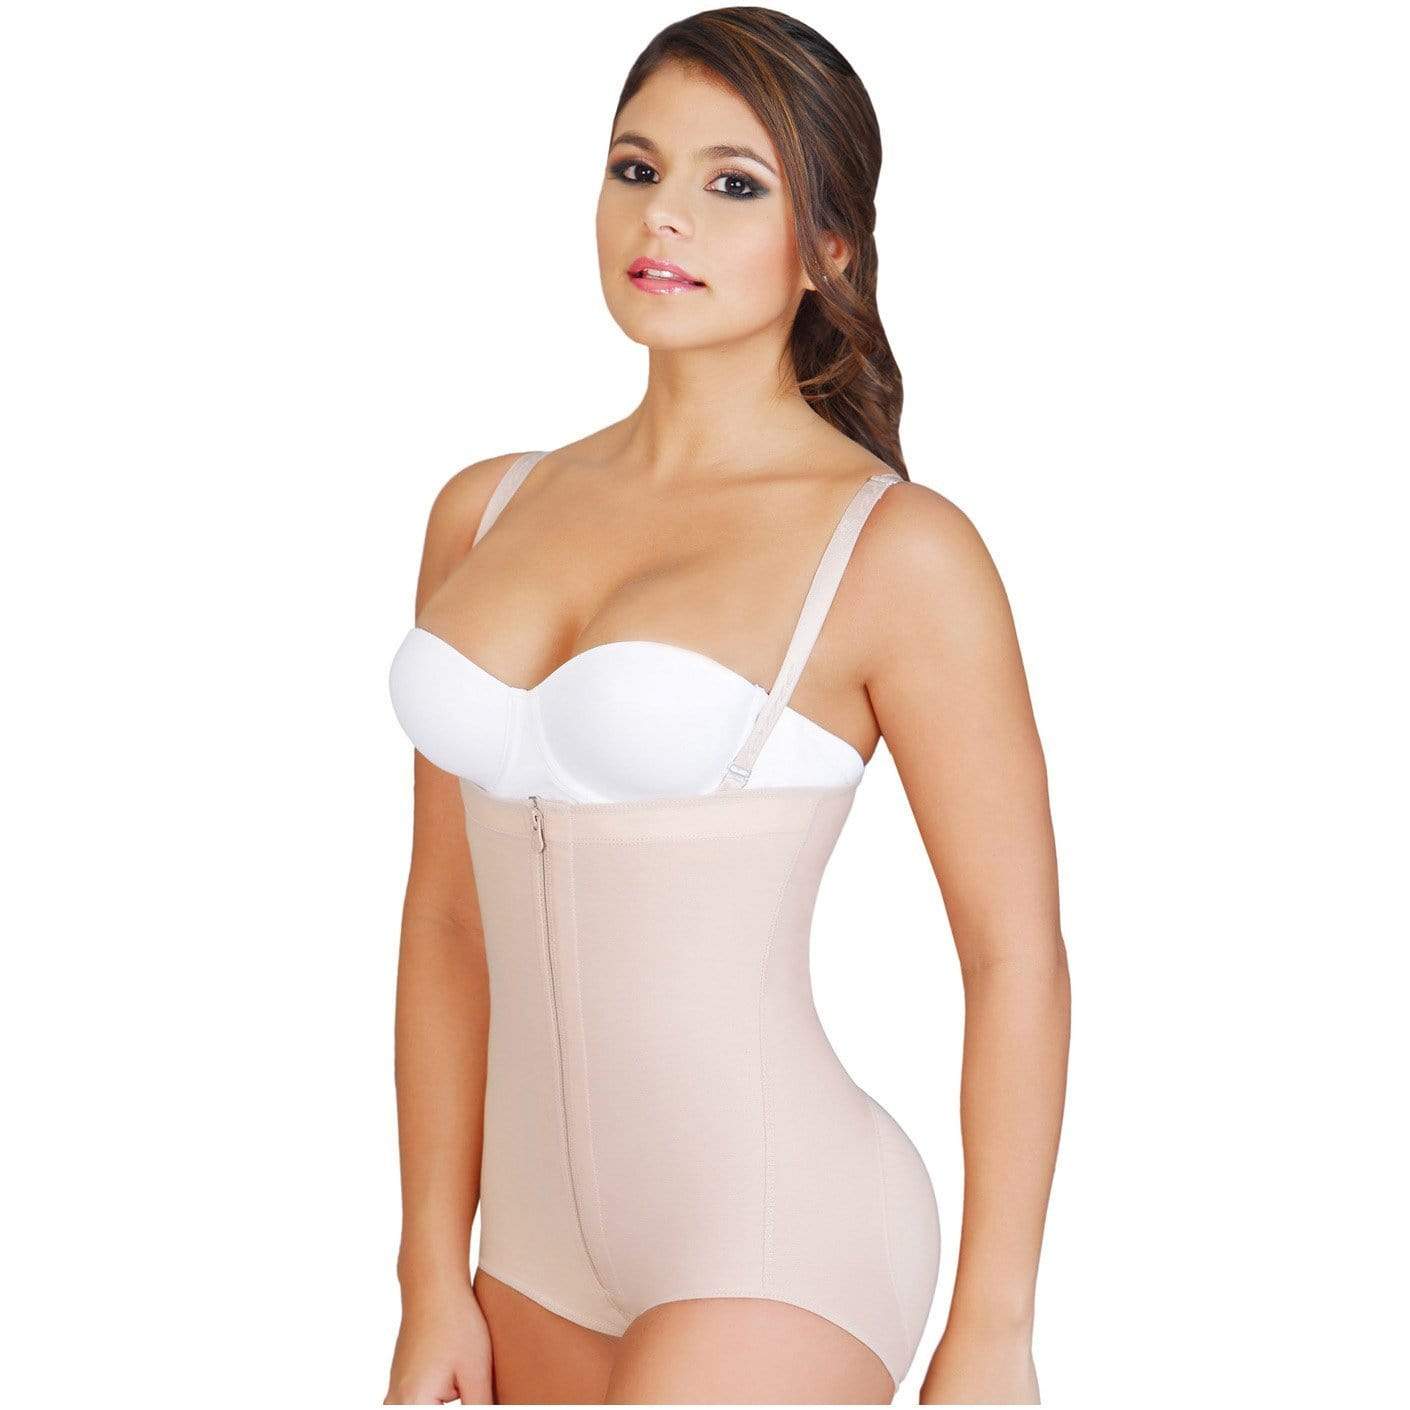 Butt Lifter Daily Use Shapewear, Post-surgical Postpartum Girdle, 23